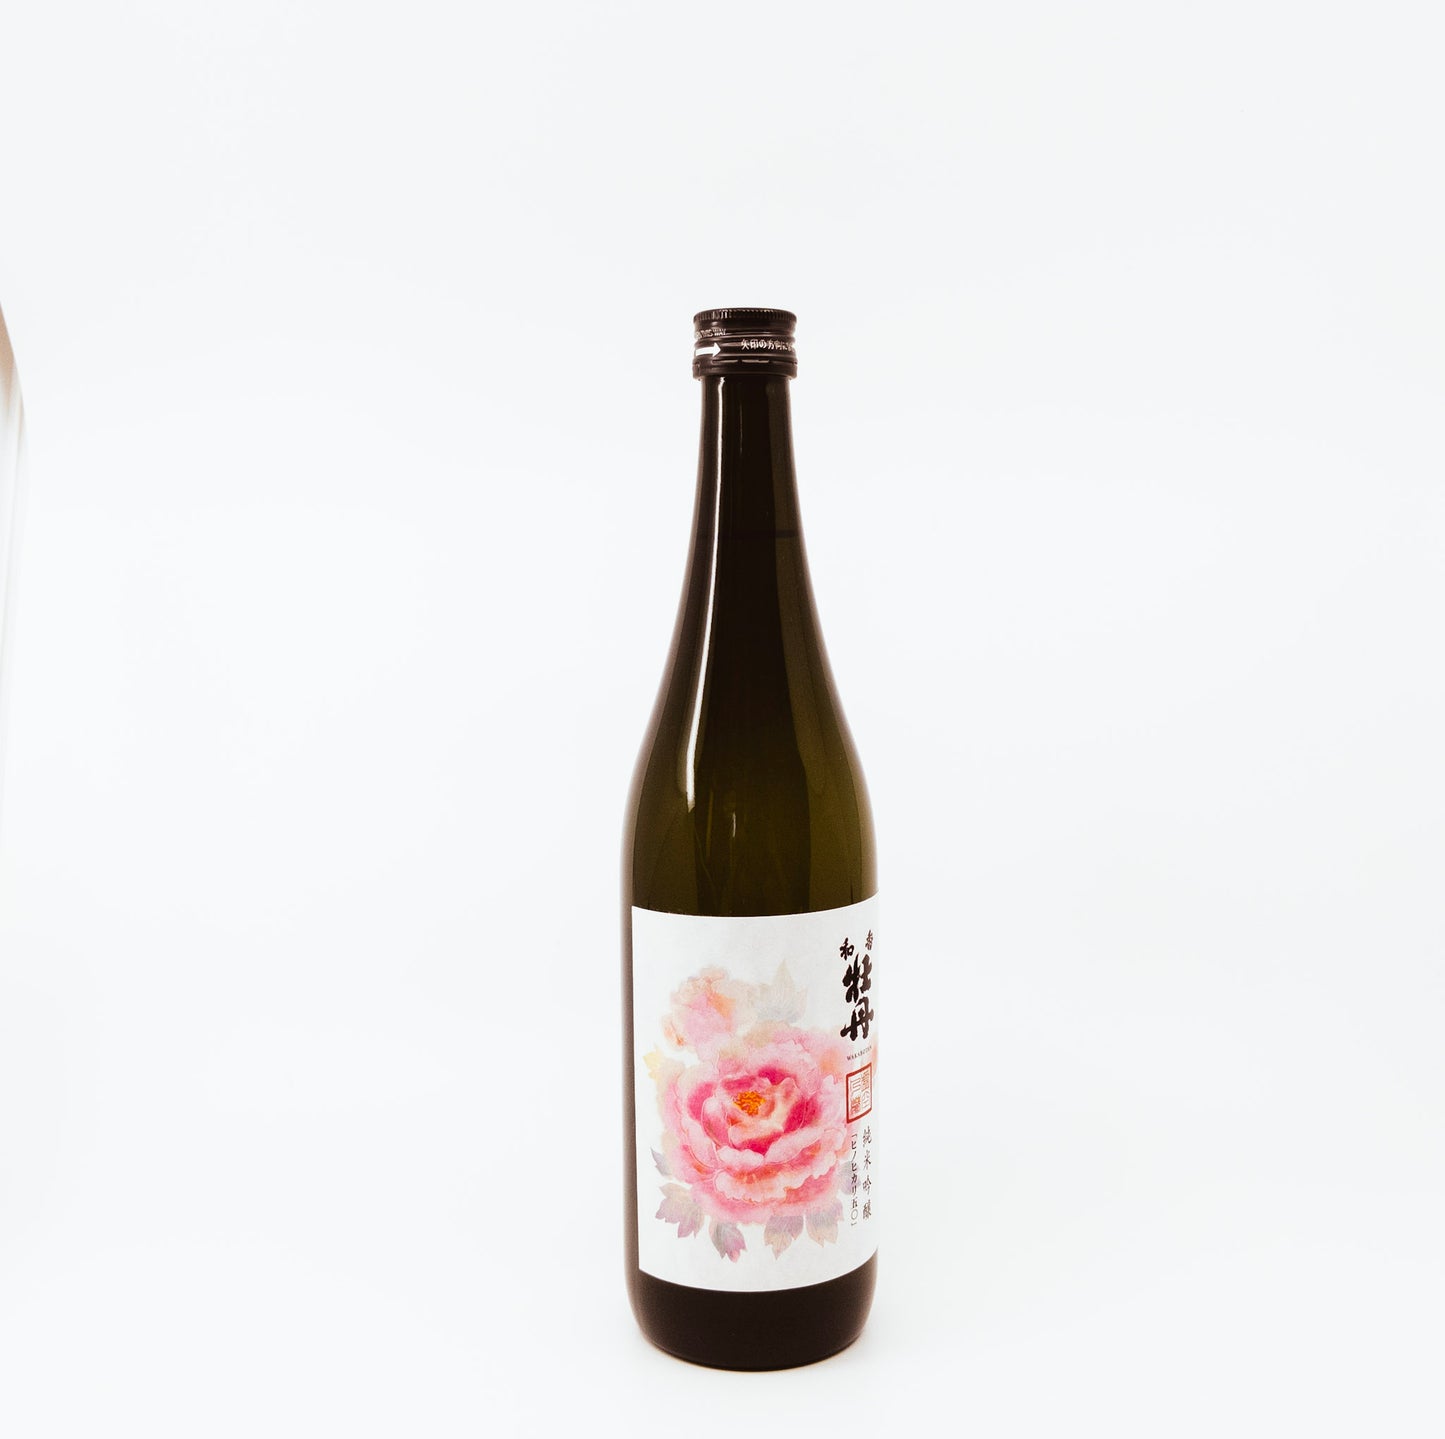 glass bottle with pink rose on label